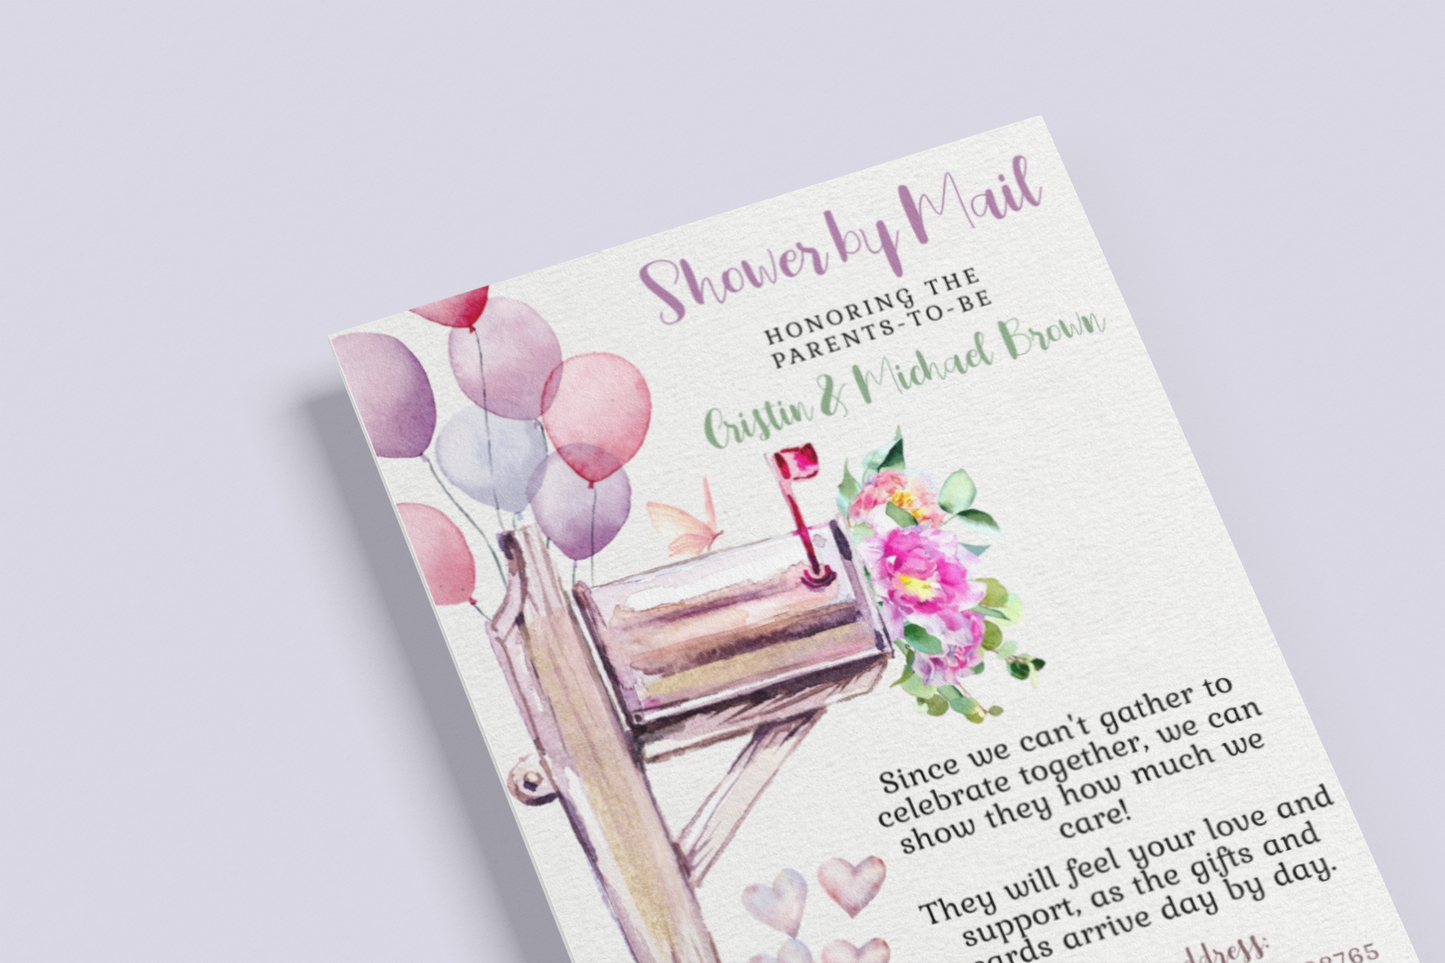 Pink Mailbox and Balloons Editable Shower By Mail Invitation - 31